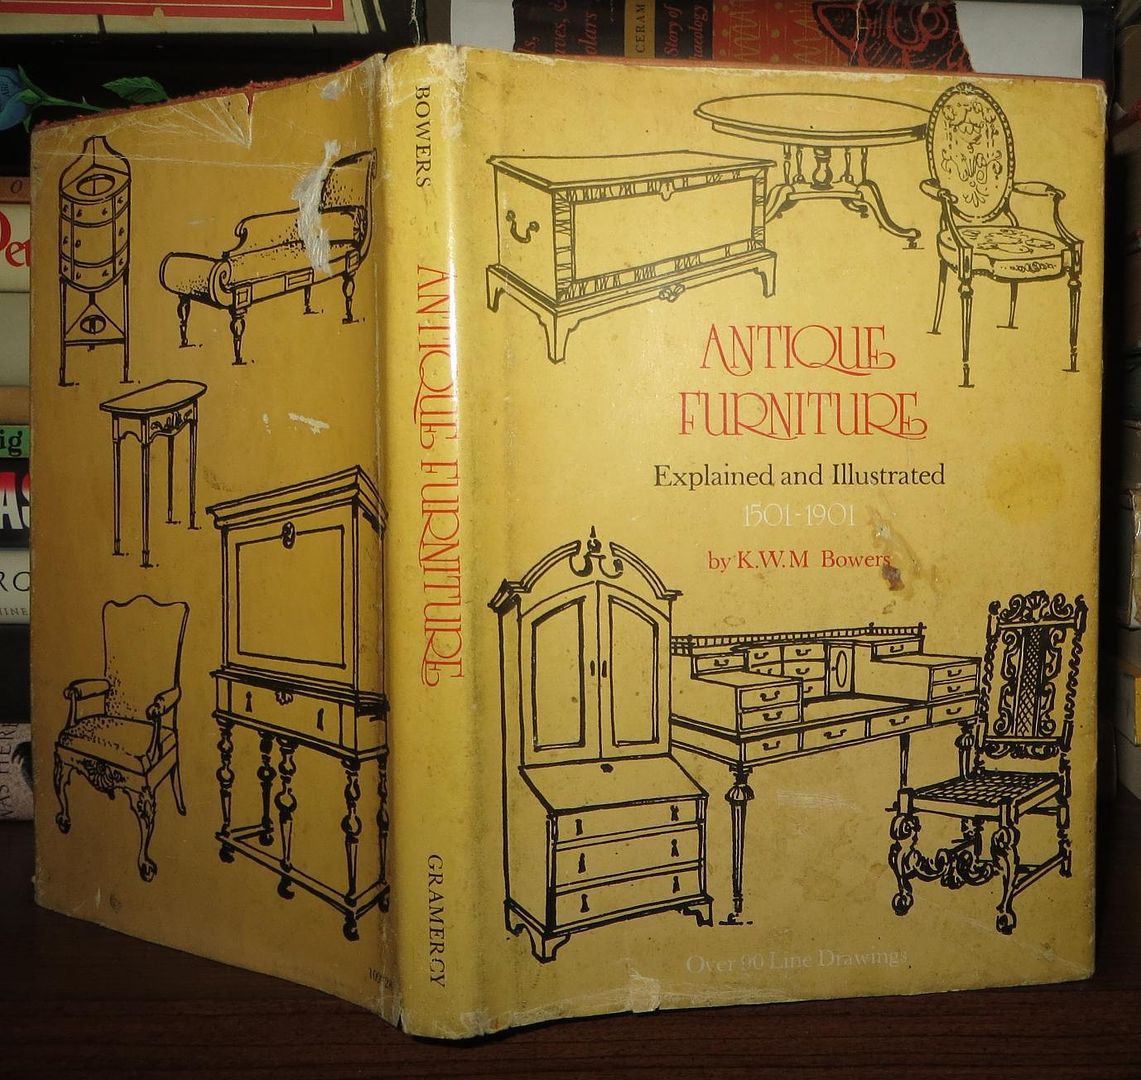 BOWERS, K. W. M. - Antique Furniture Explained and Illustrated 1501-1901